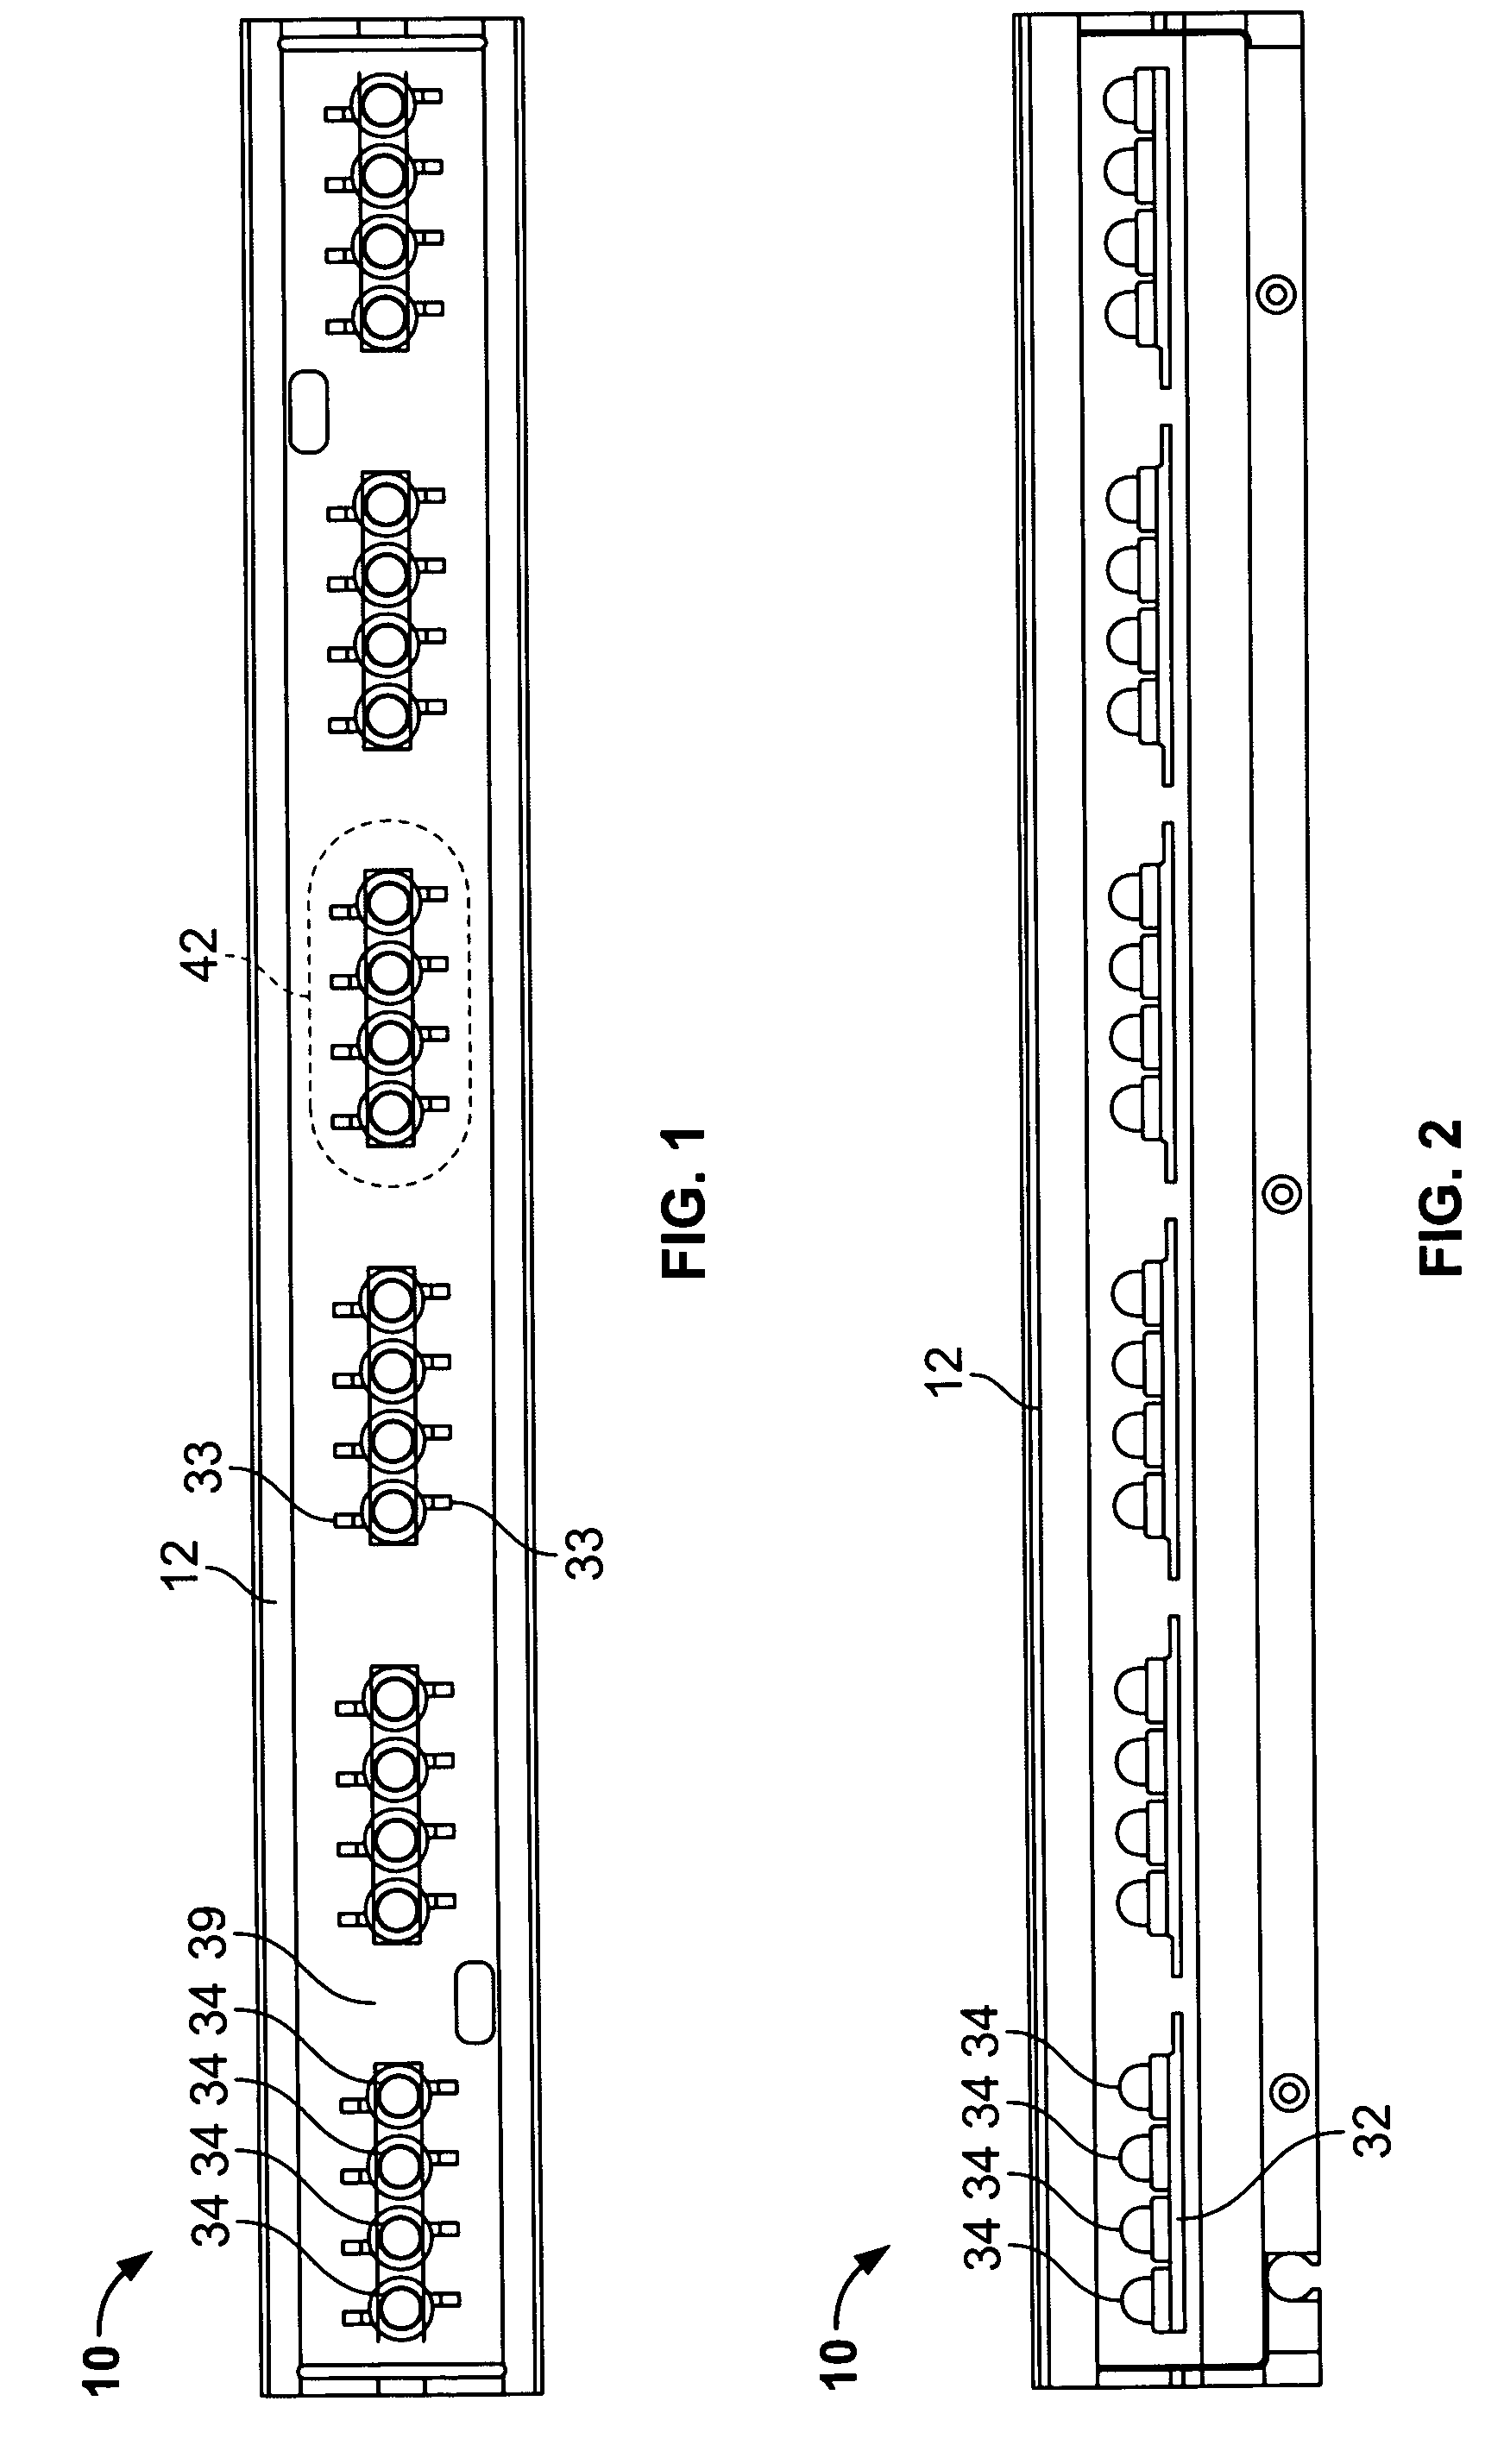 Light fixture for an LED-based aircraft lighting system